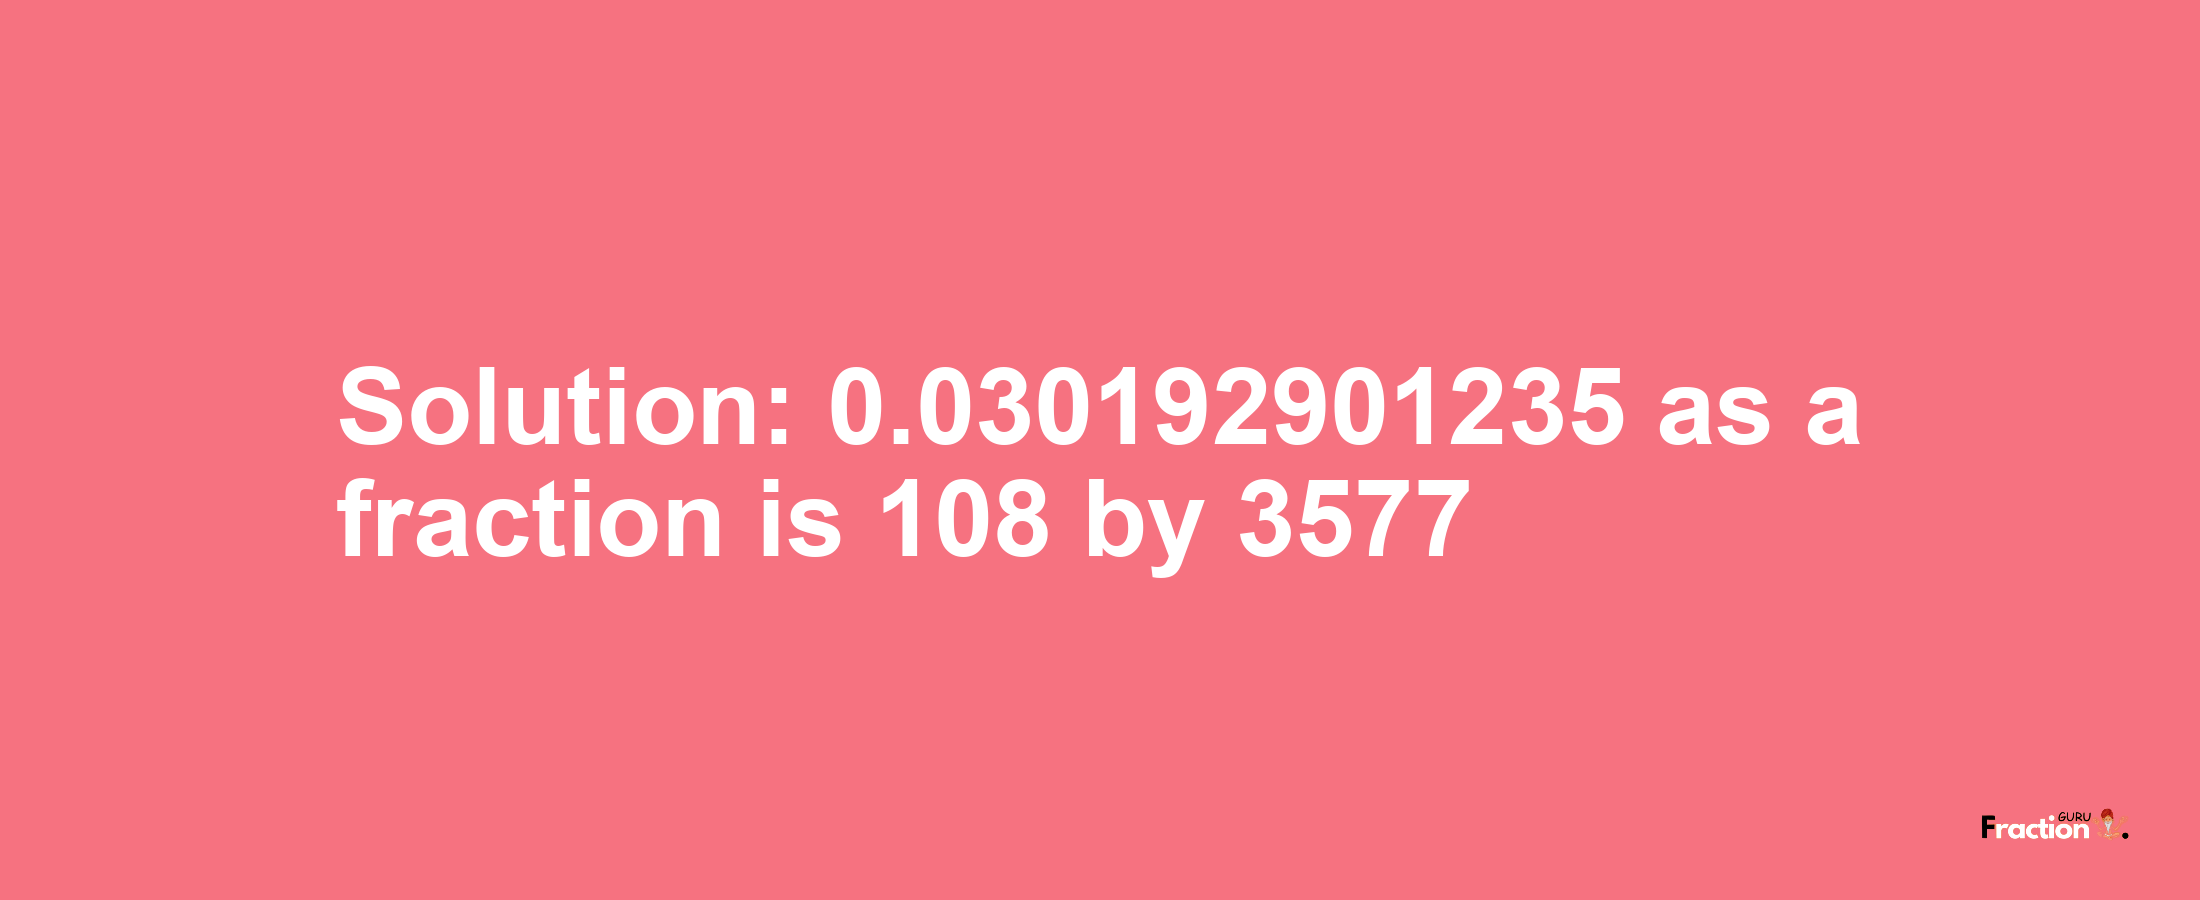 Solution:0.030192901235 as a fraction is 108/3577